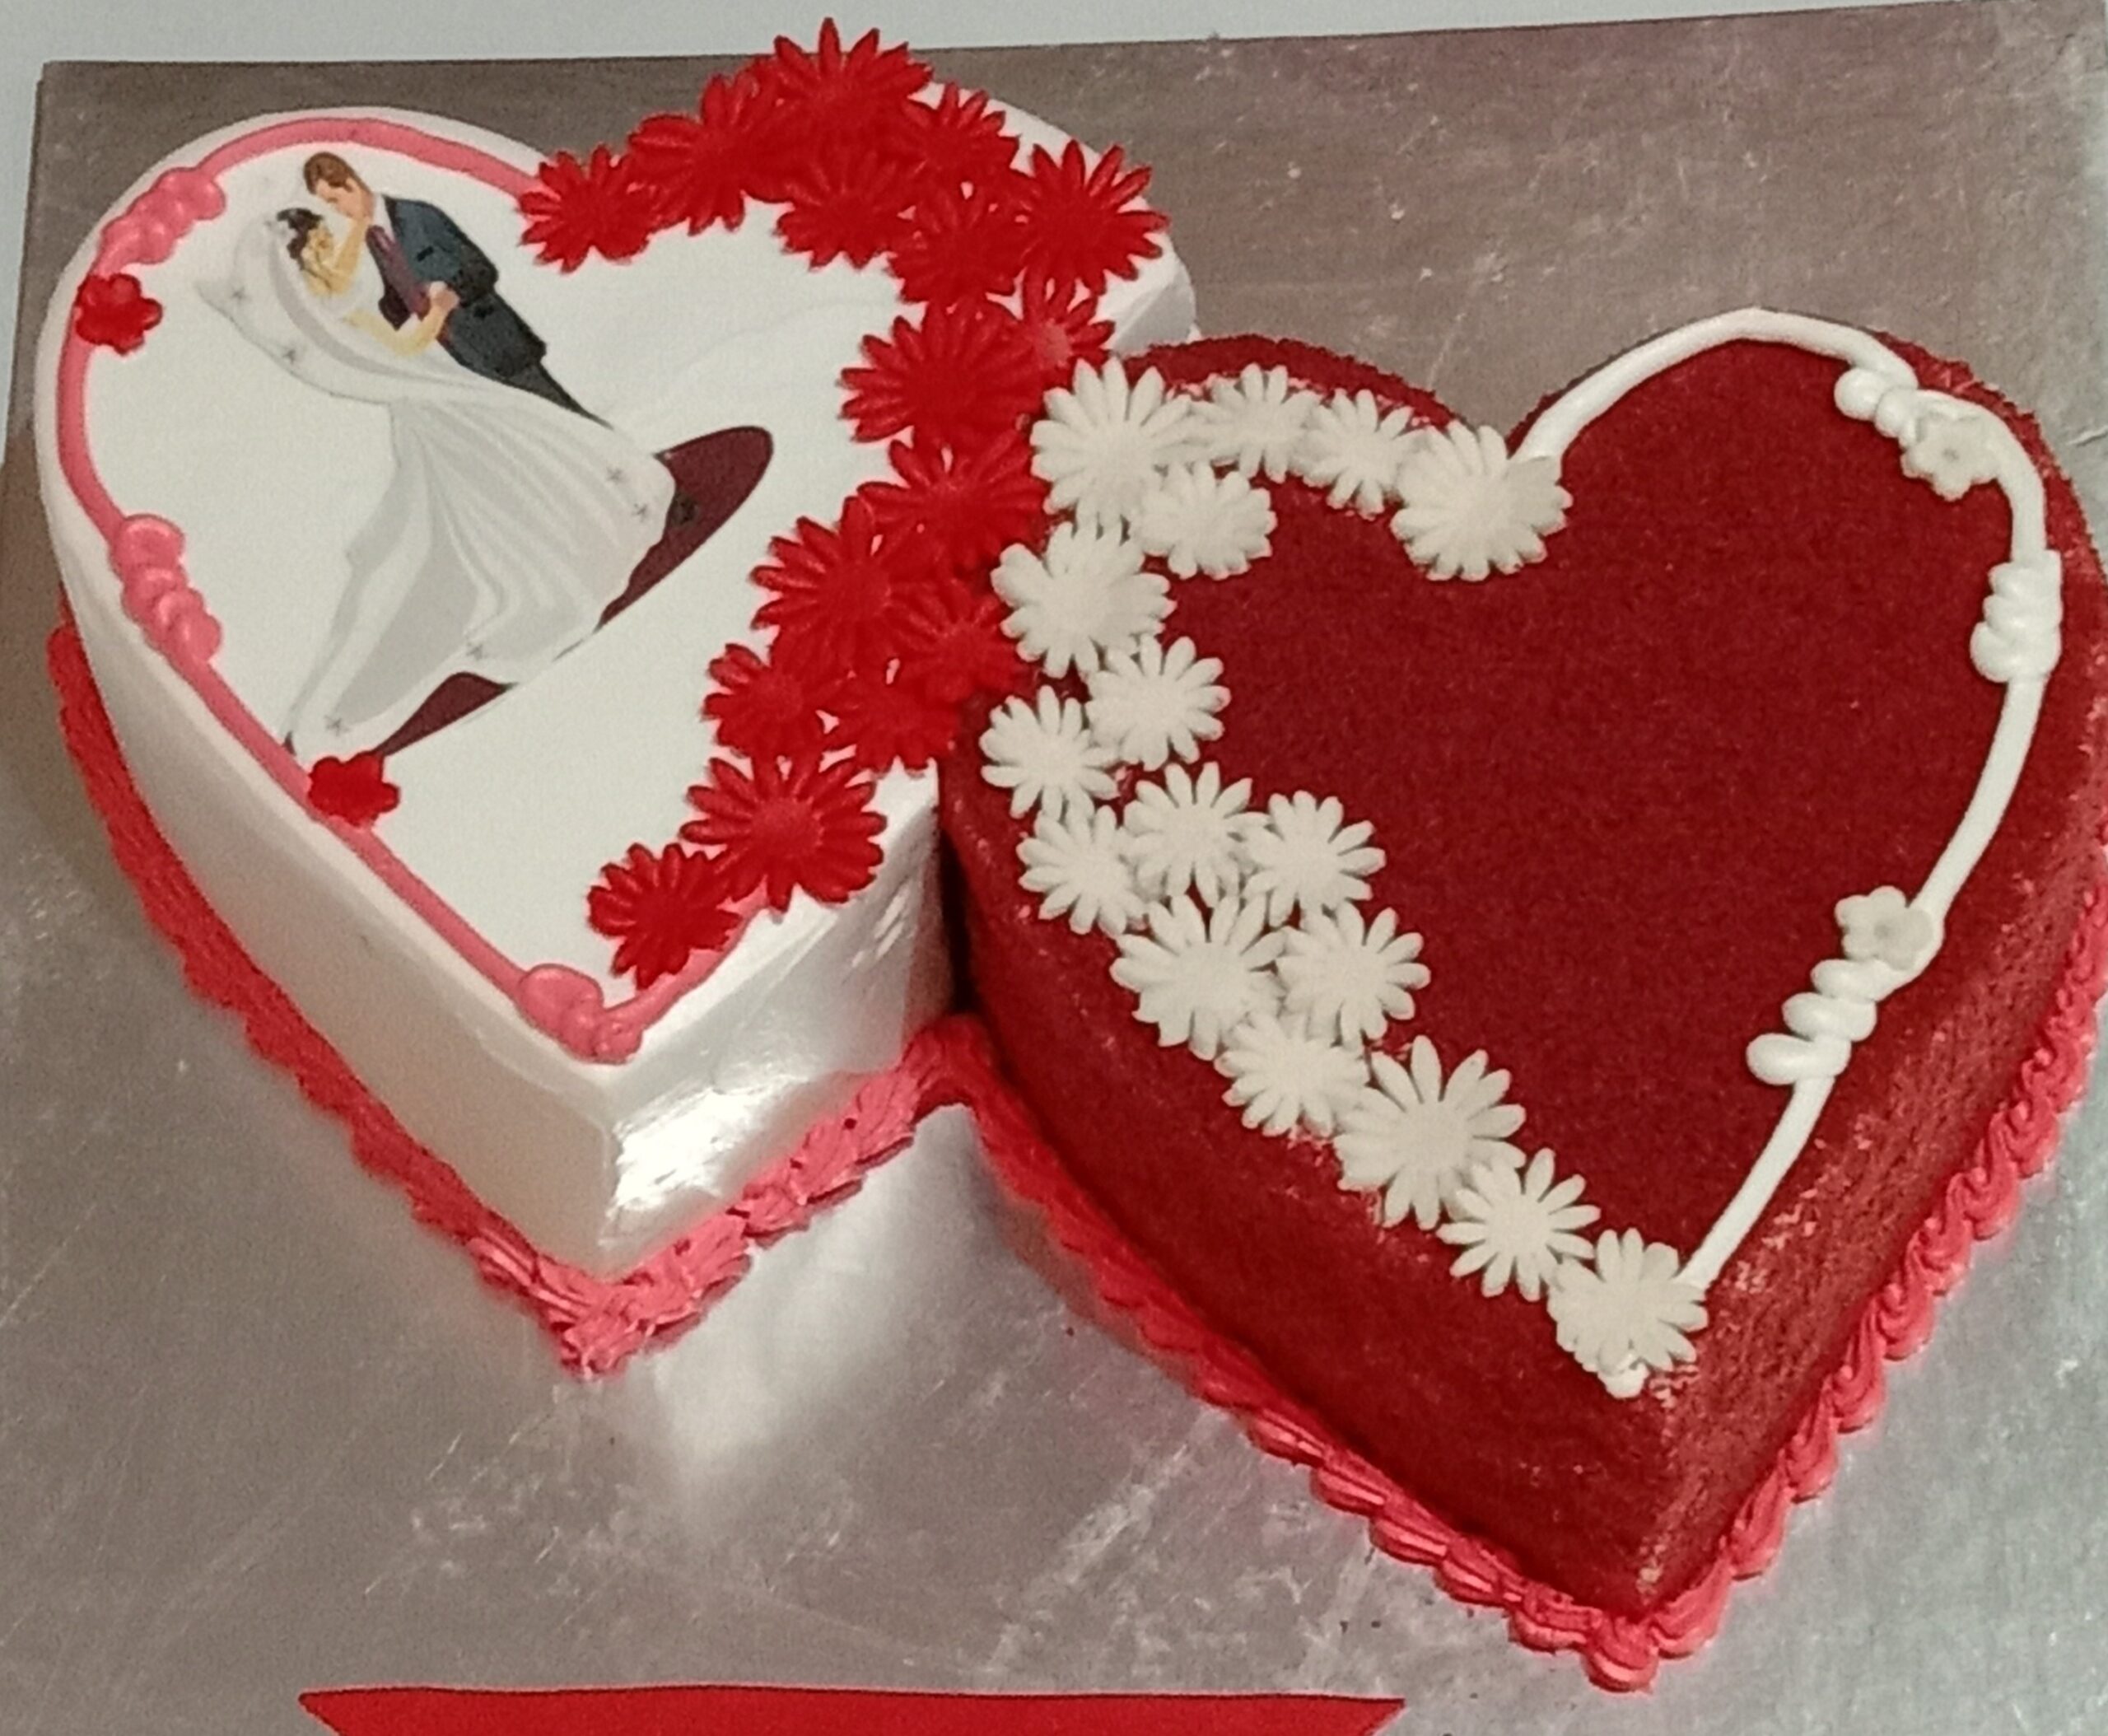 Hanging Hearts Engagement Cake | Engagement and Wedding Cakes by Kukkr